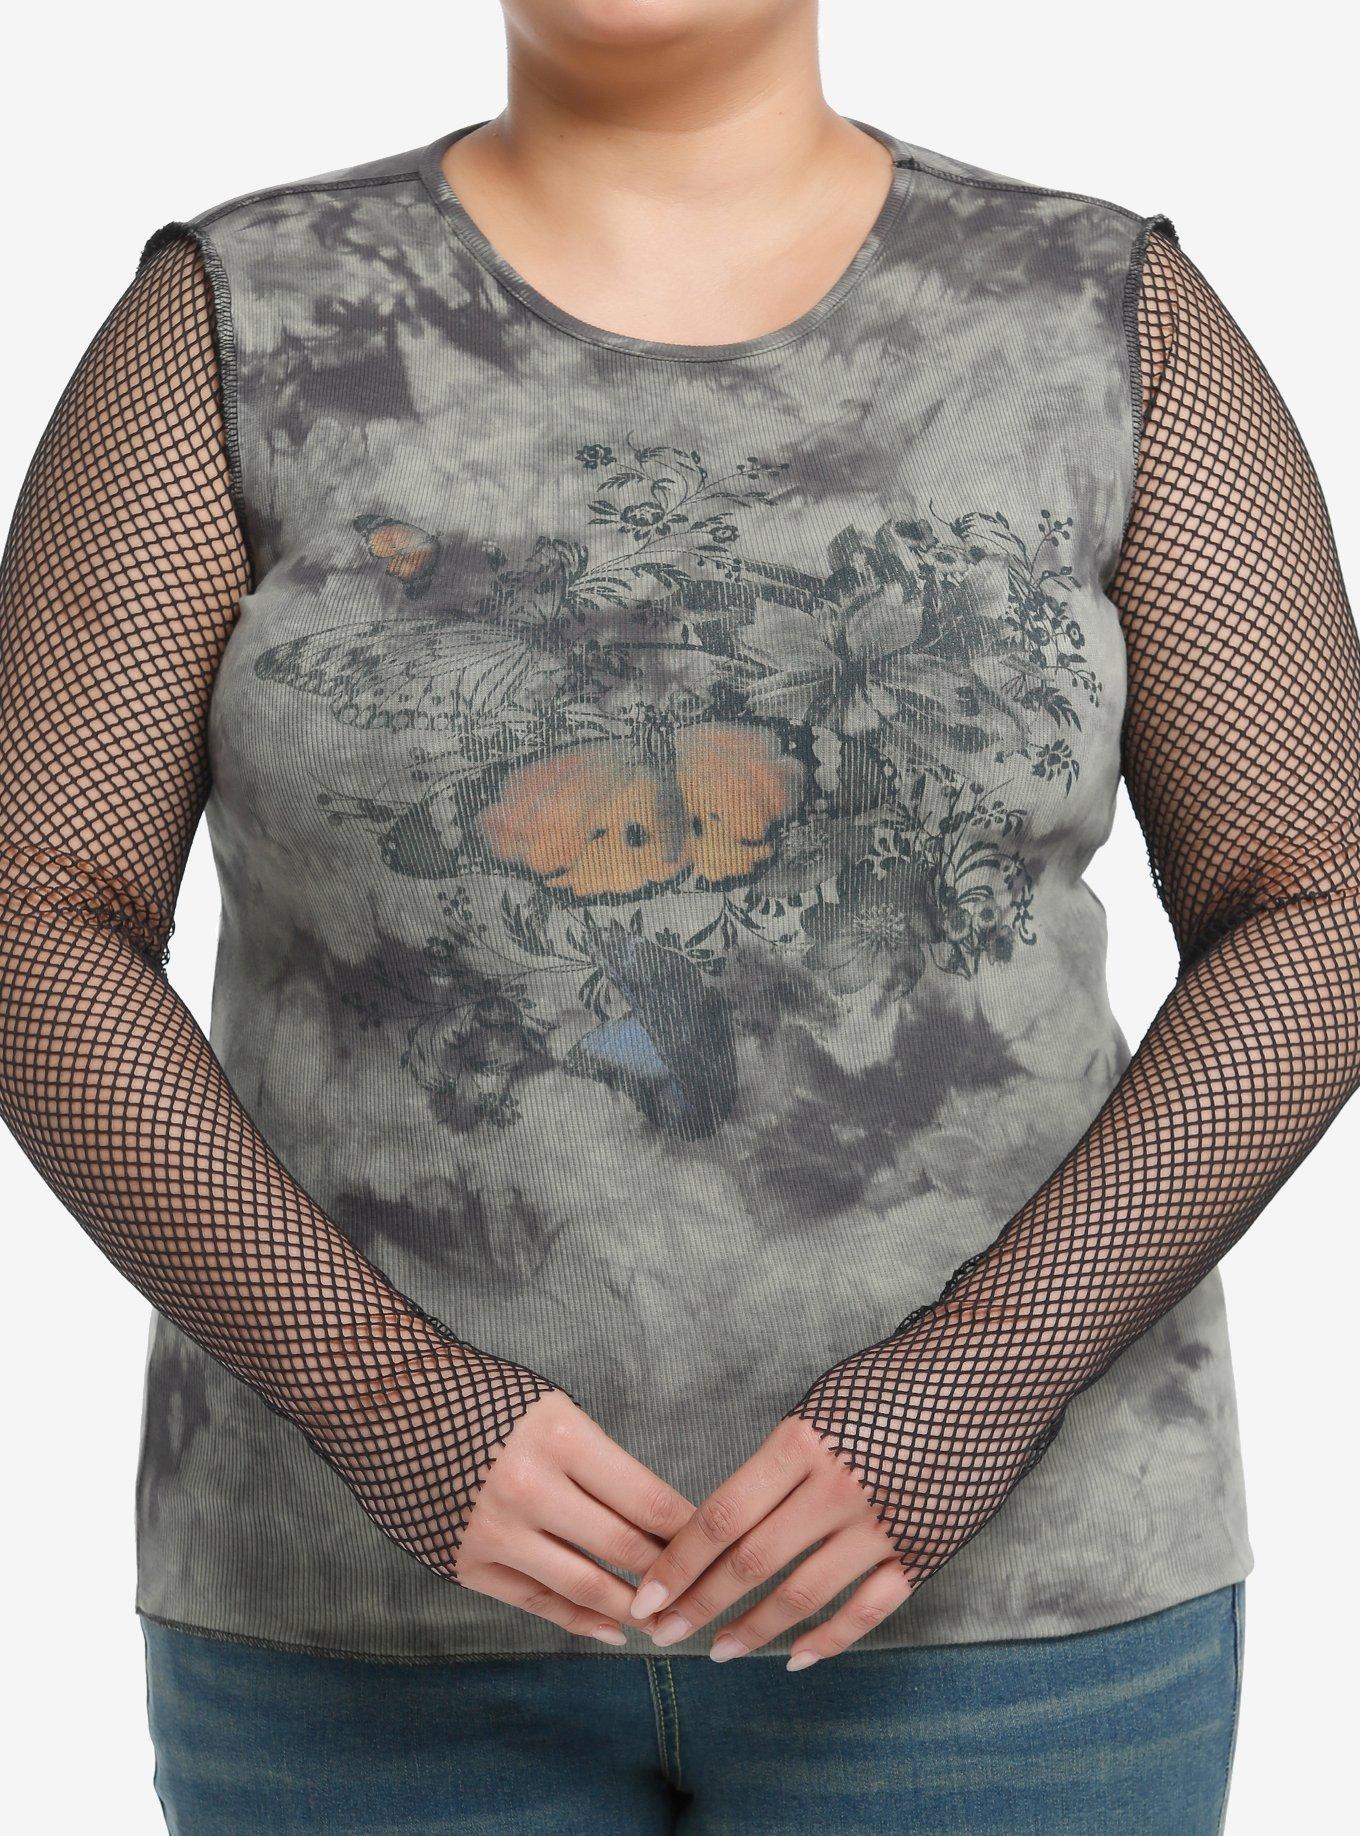 Thorn & Fable Grunge Butterfly Mesh Girls Long-Sleeve Top Plus Size, BLACK, hi-res